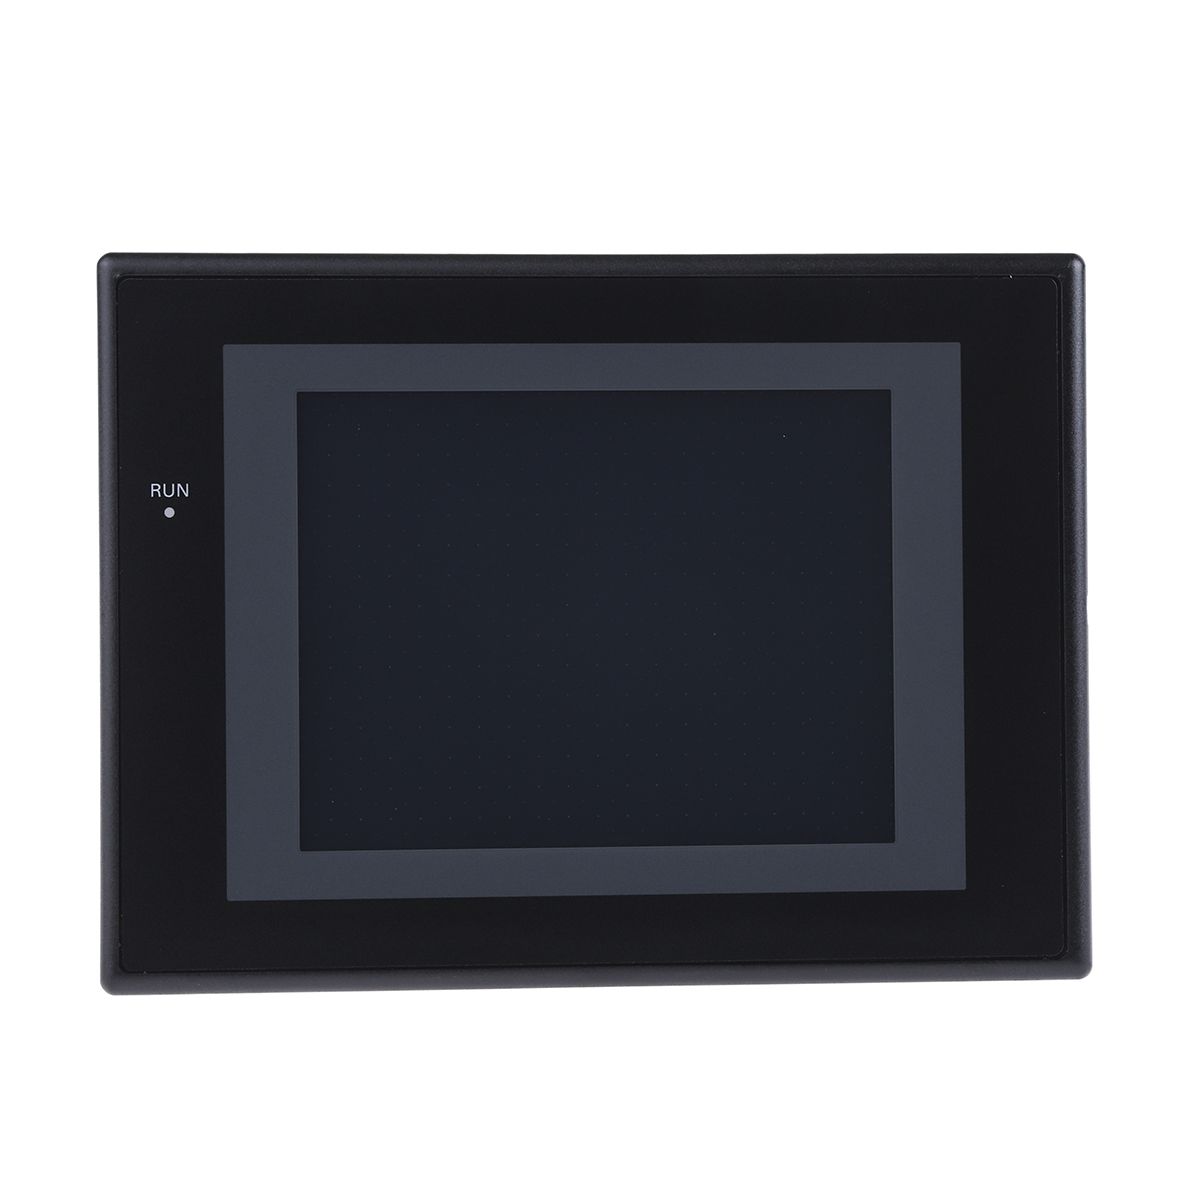 Omron 57 tommer LCD Touchscreen HMI, NS5 Farve, 320 x 240pixels, 195 x 142 x 53,8 mm